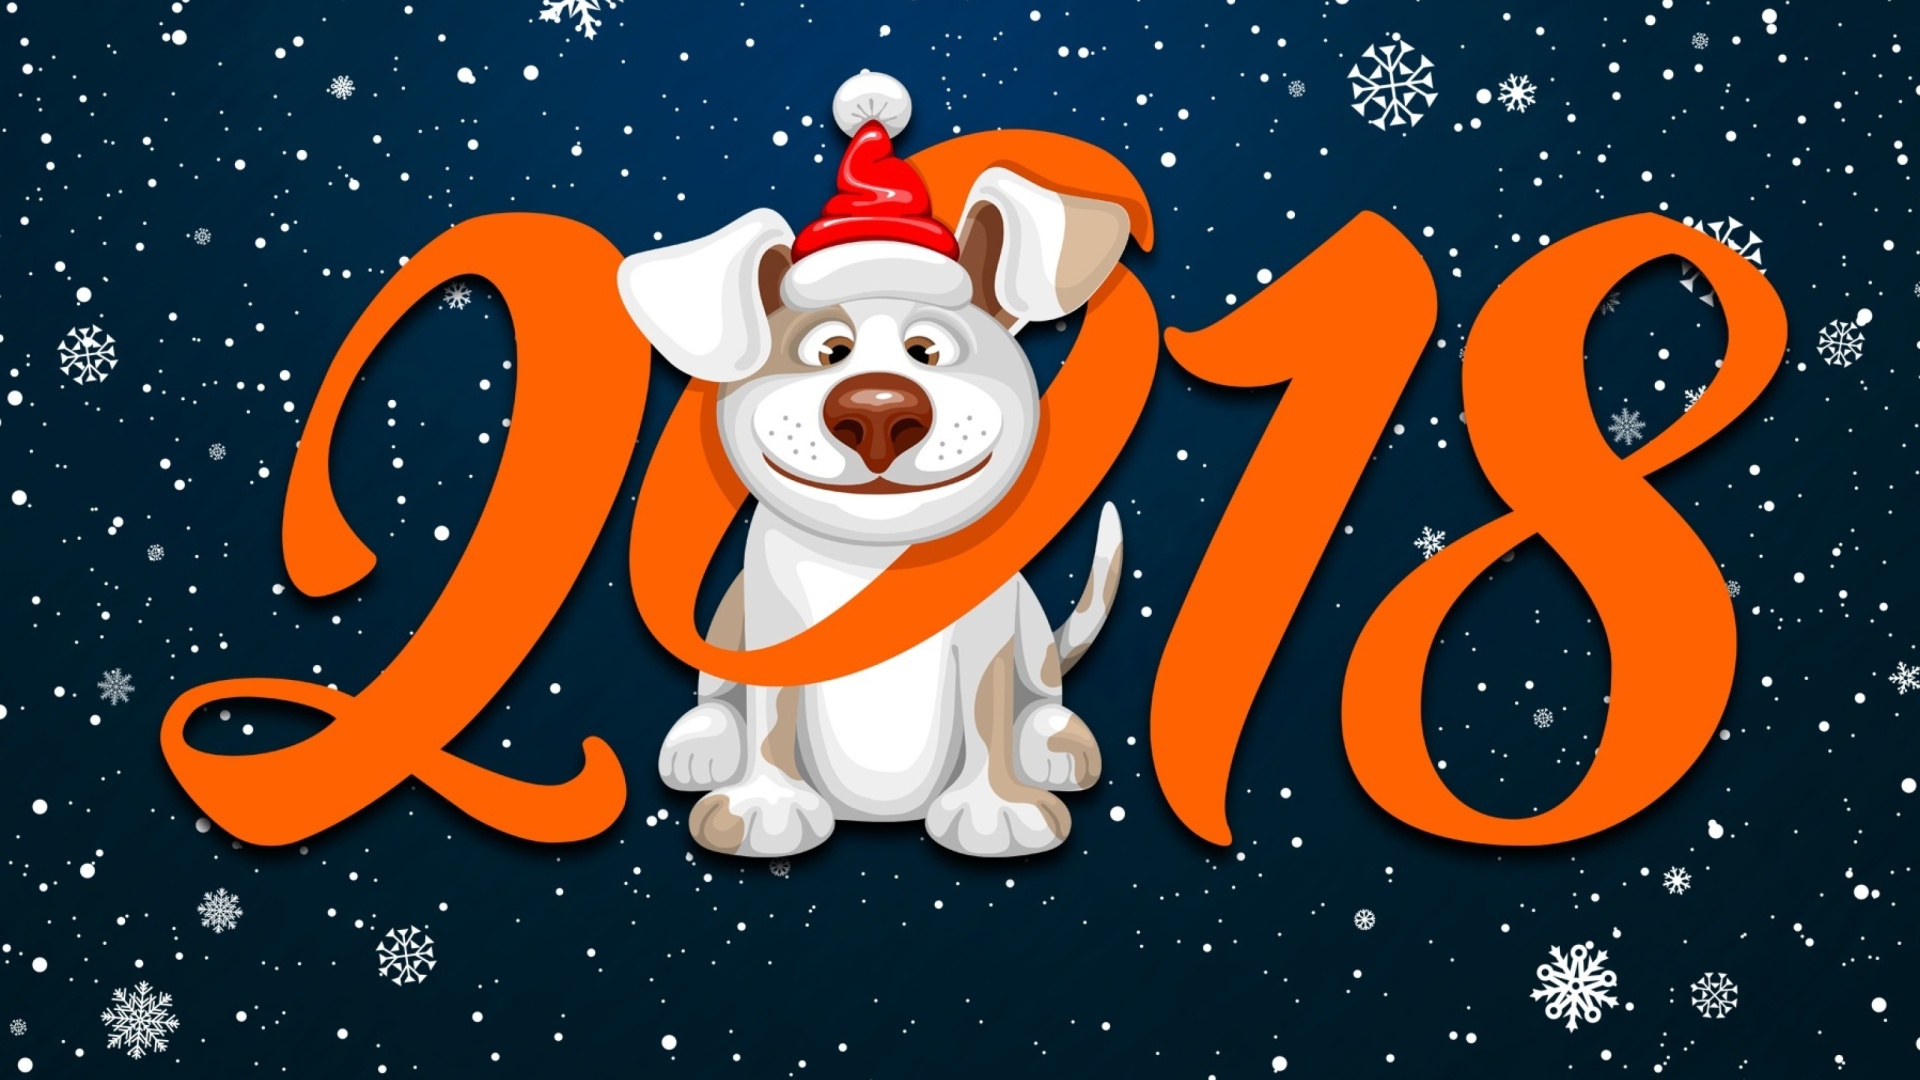 New Year Dog 2018 with Snow wallpaper 1920x1080